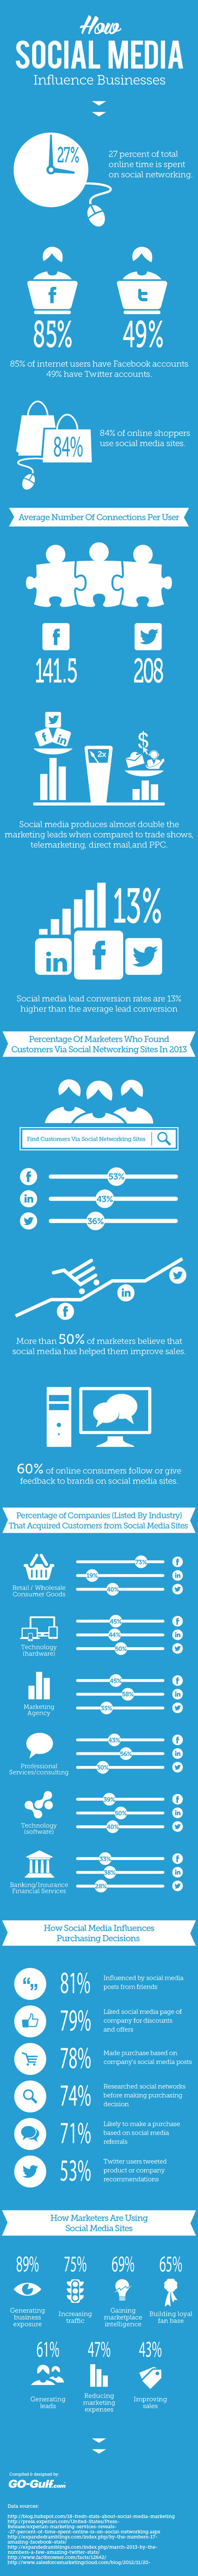 How Social Media Influence Businesses | Great #Infographic from Visual.ly | Latest Social Media News | Scoop.it